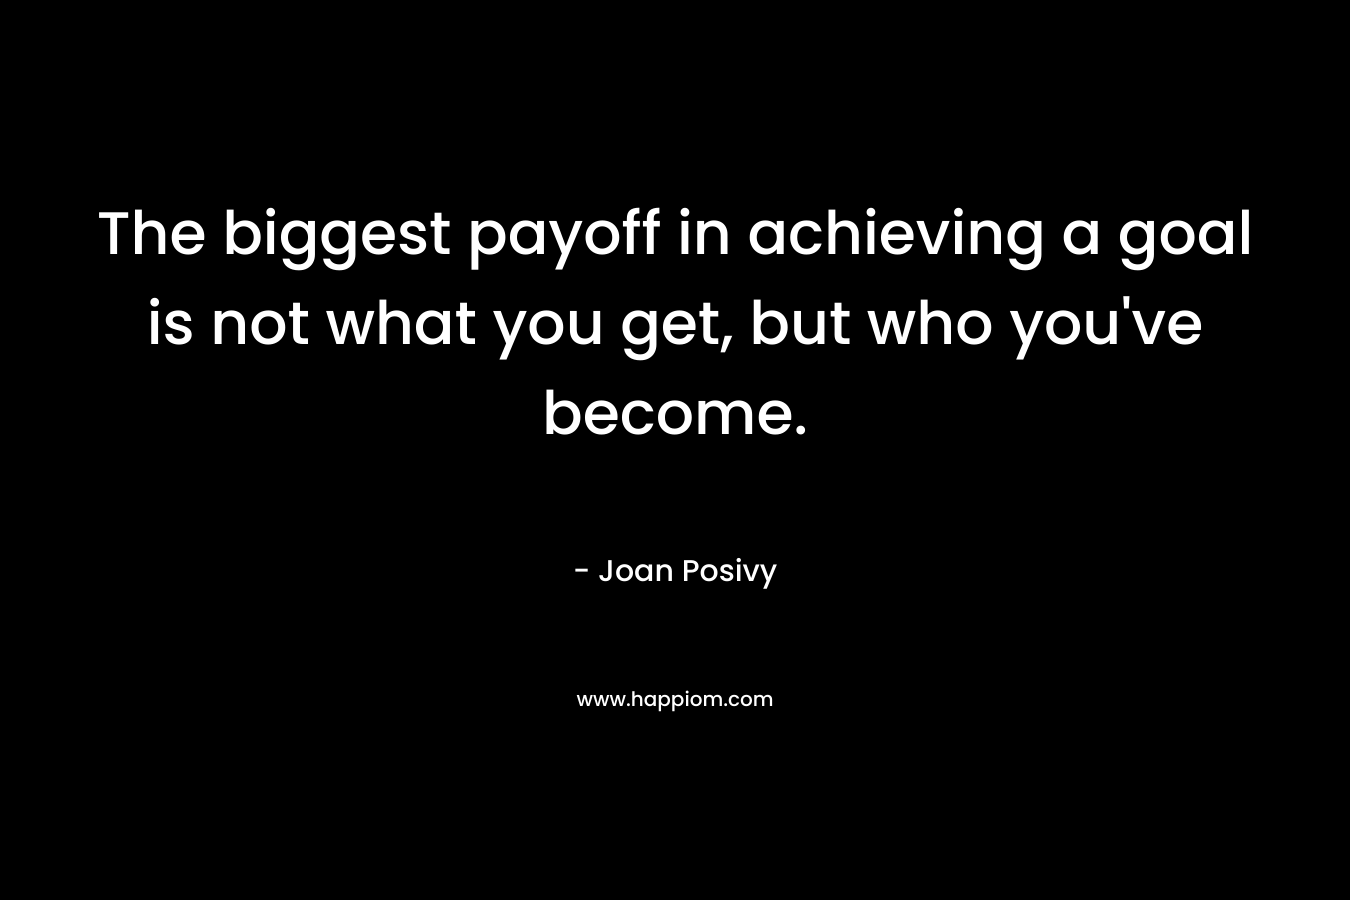 The biggest payoff in achieving a goal is not what you get, but who you've become.